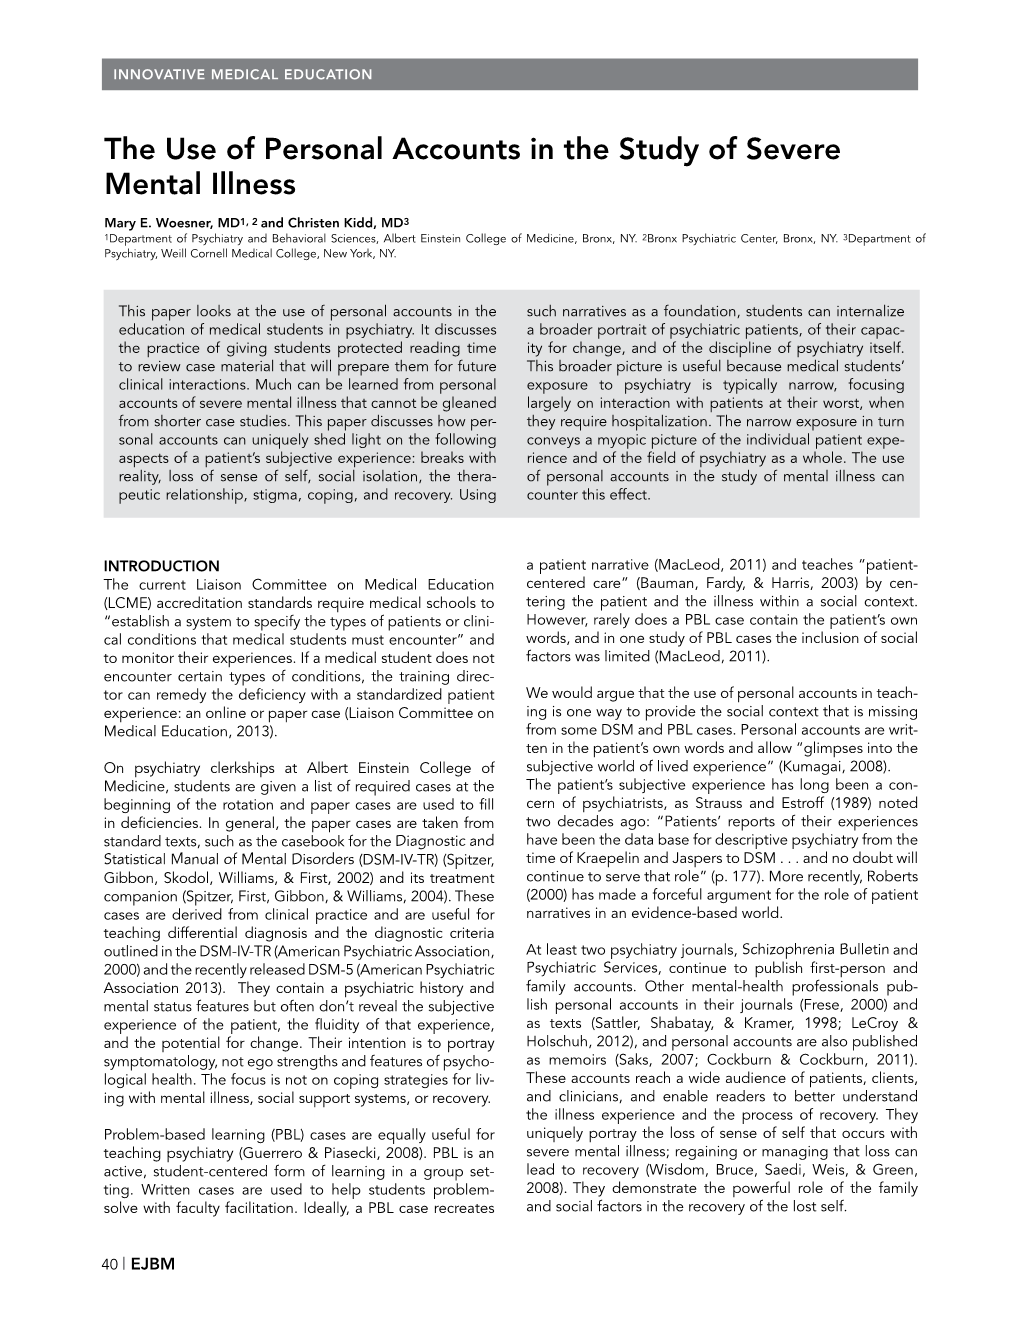 The Use of Personal Accounts in the Study of Severe Mental Illness